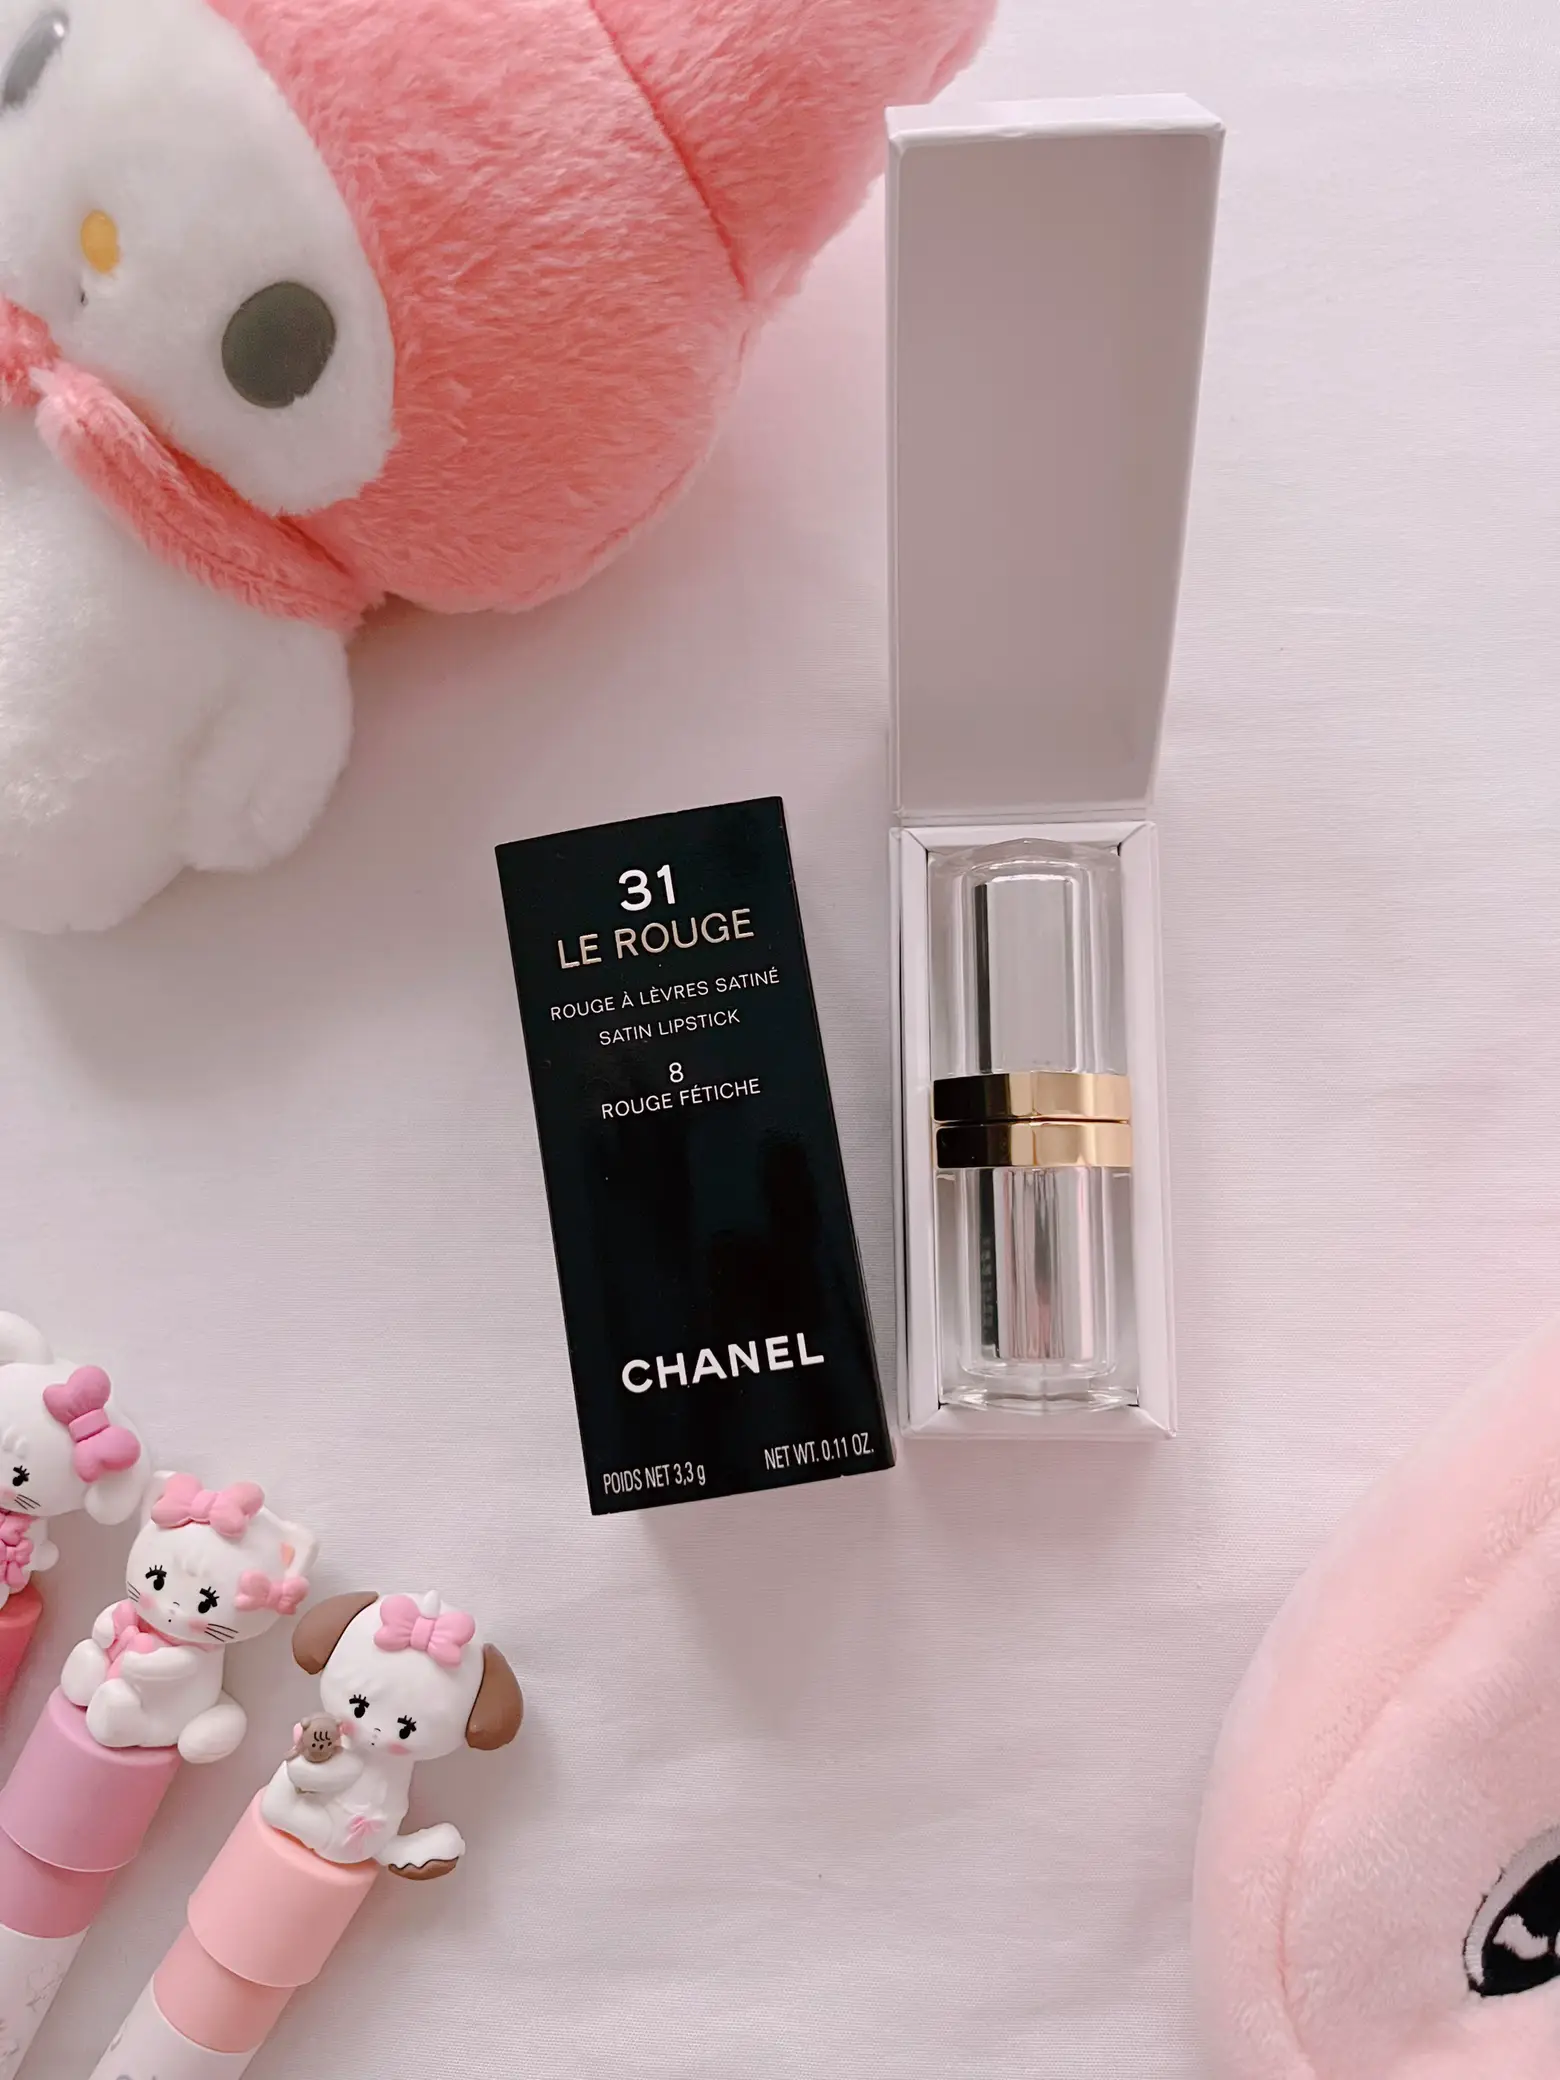 Chanel's new exclusive lipstick: 31 le rouge 💕, Gallery posted by Jackie  ♡